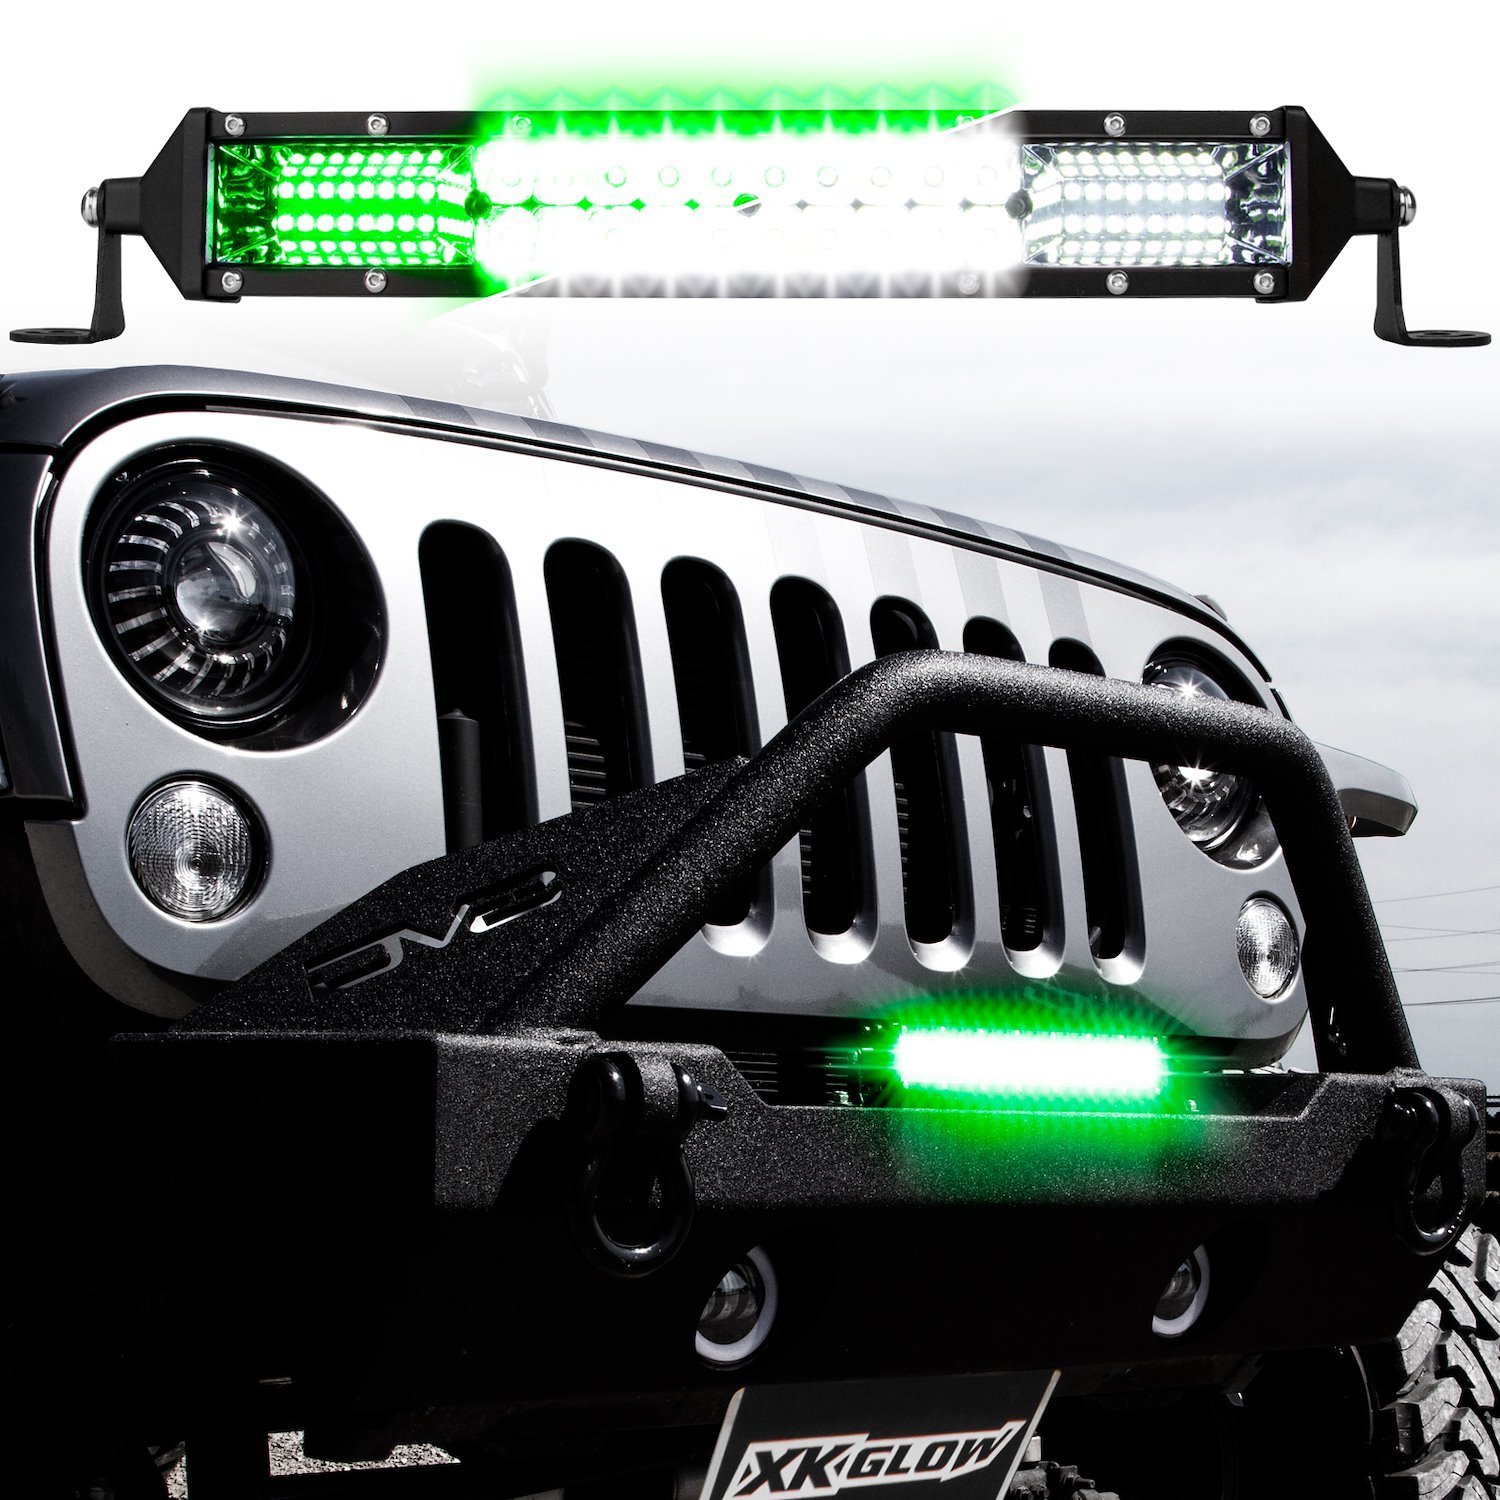 XK063010 10 in. 2-in-1 LED Light Bar, w/Pure White and Hunting Green Flood and Spot Work Light, Universal Fit